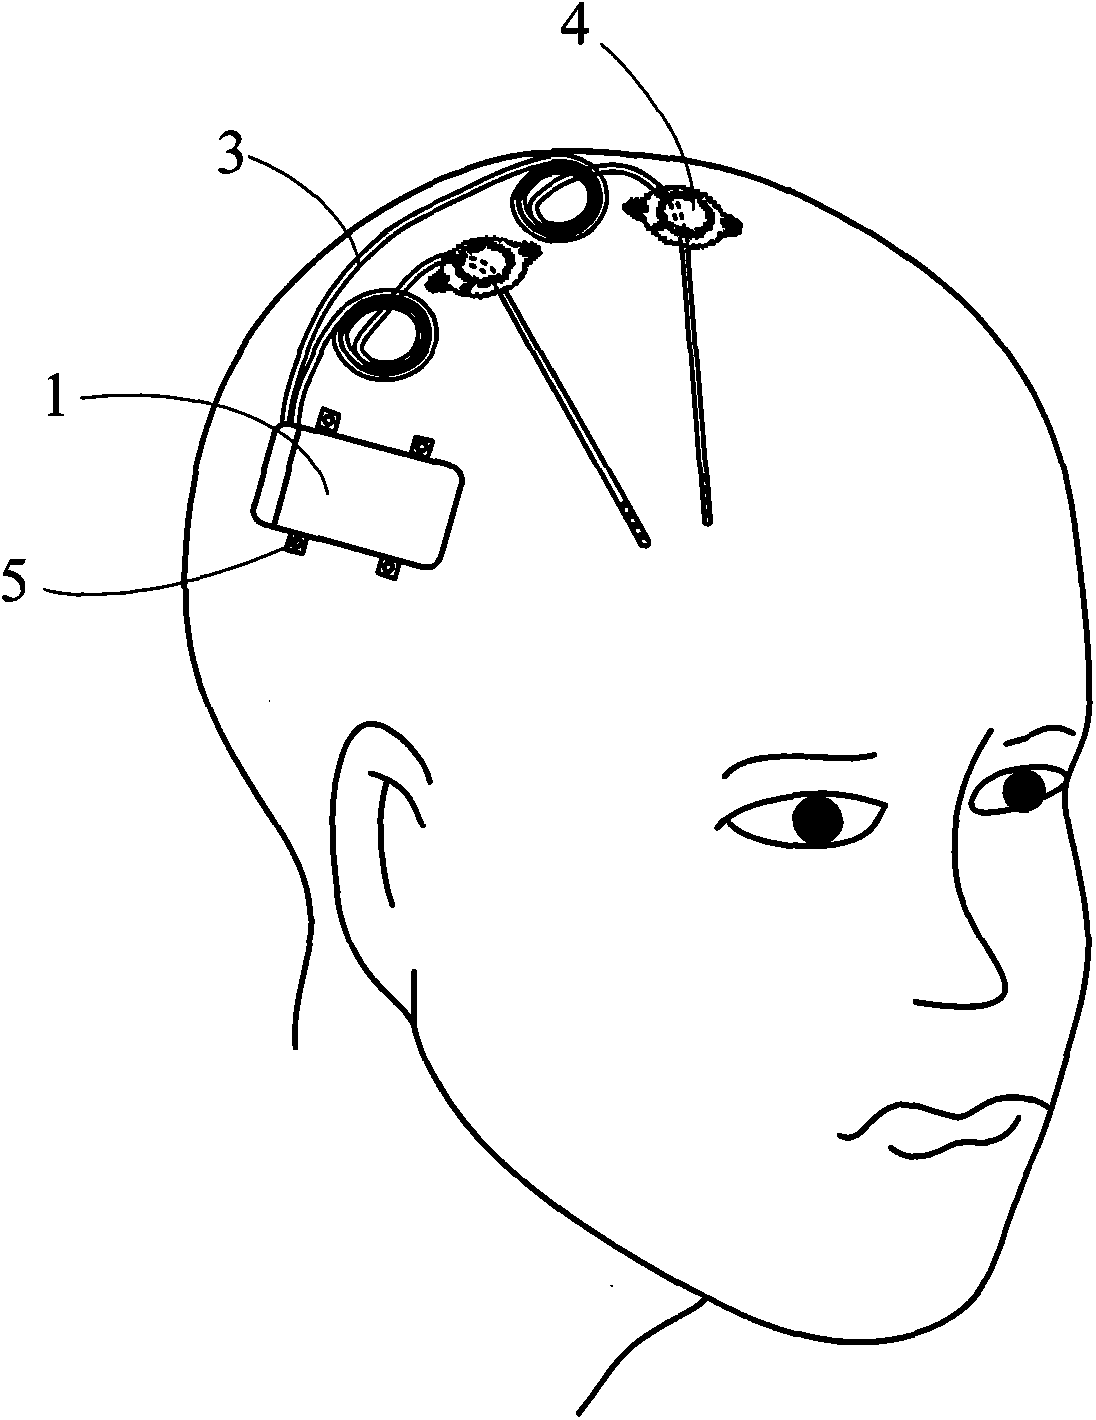 Deep brain electric stimulation system implanted in head